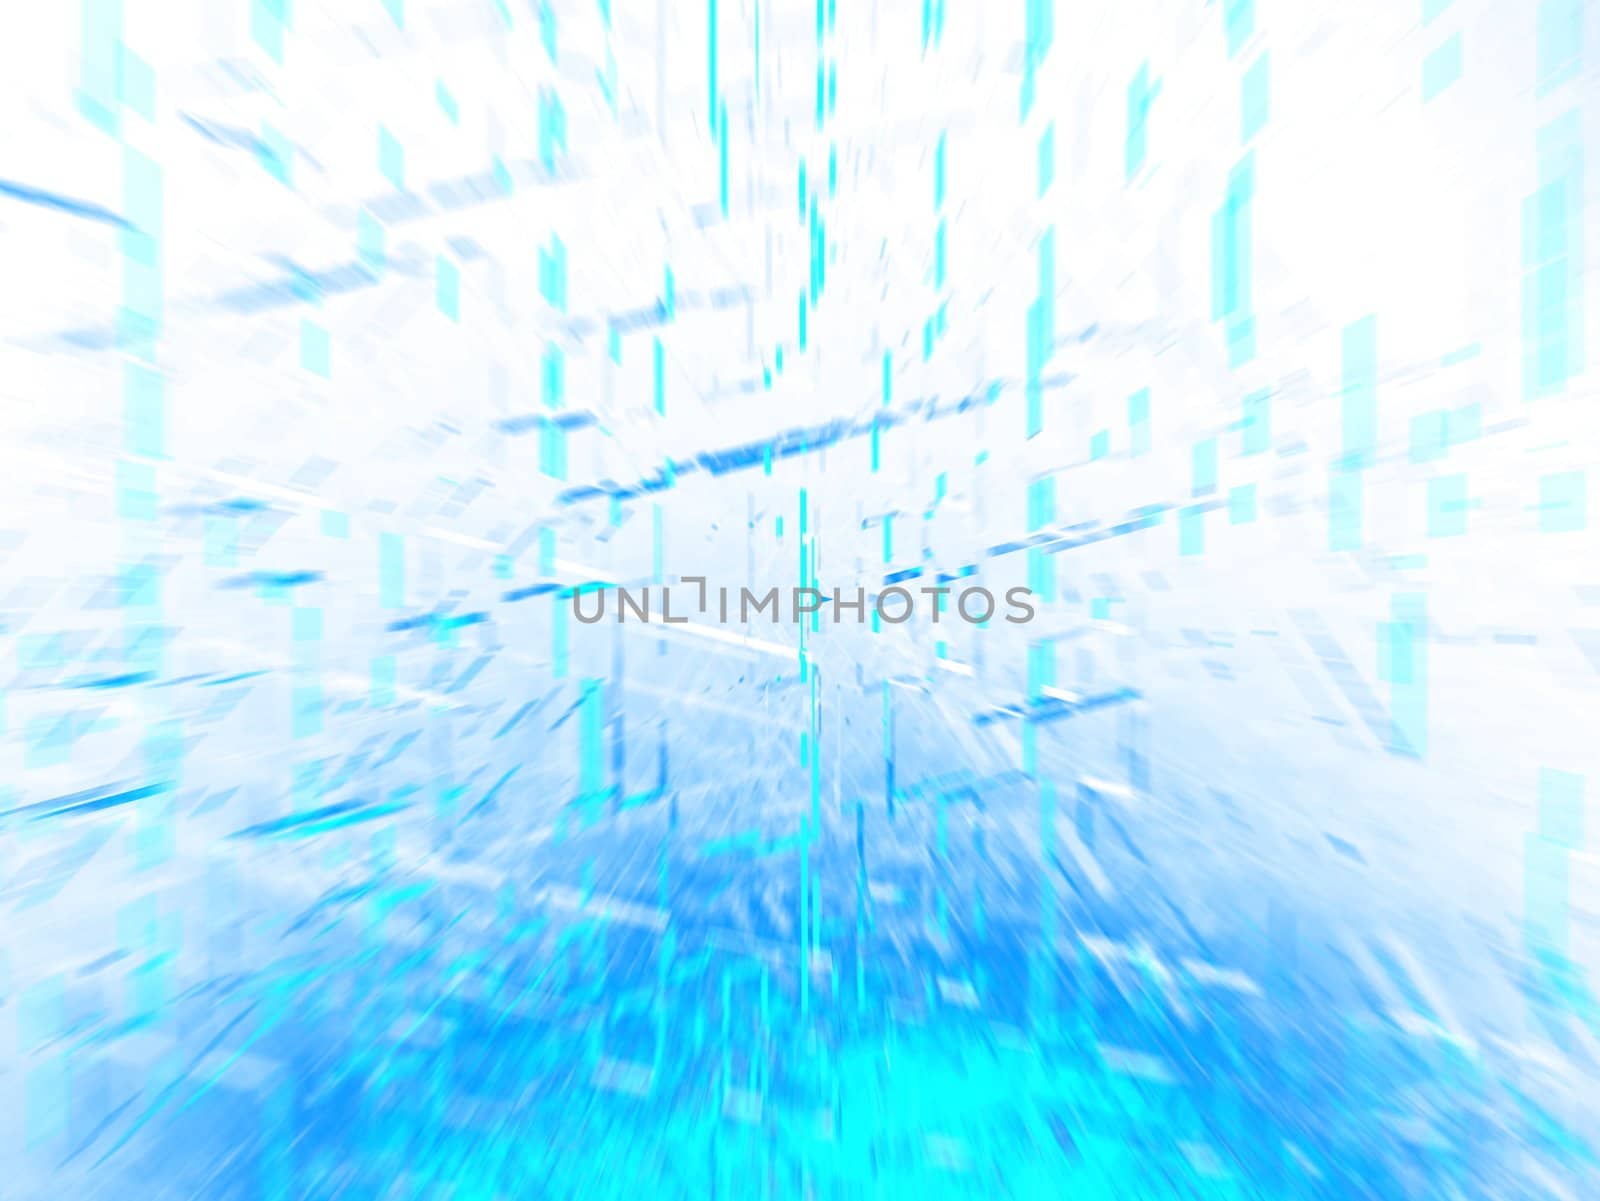 Abstract blue image with zooming motion blur